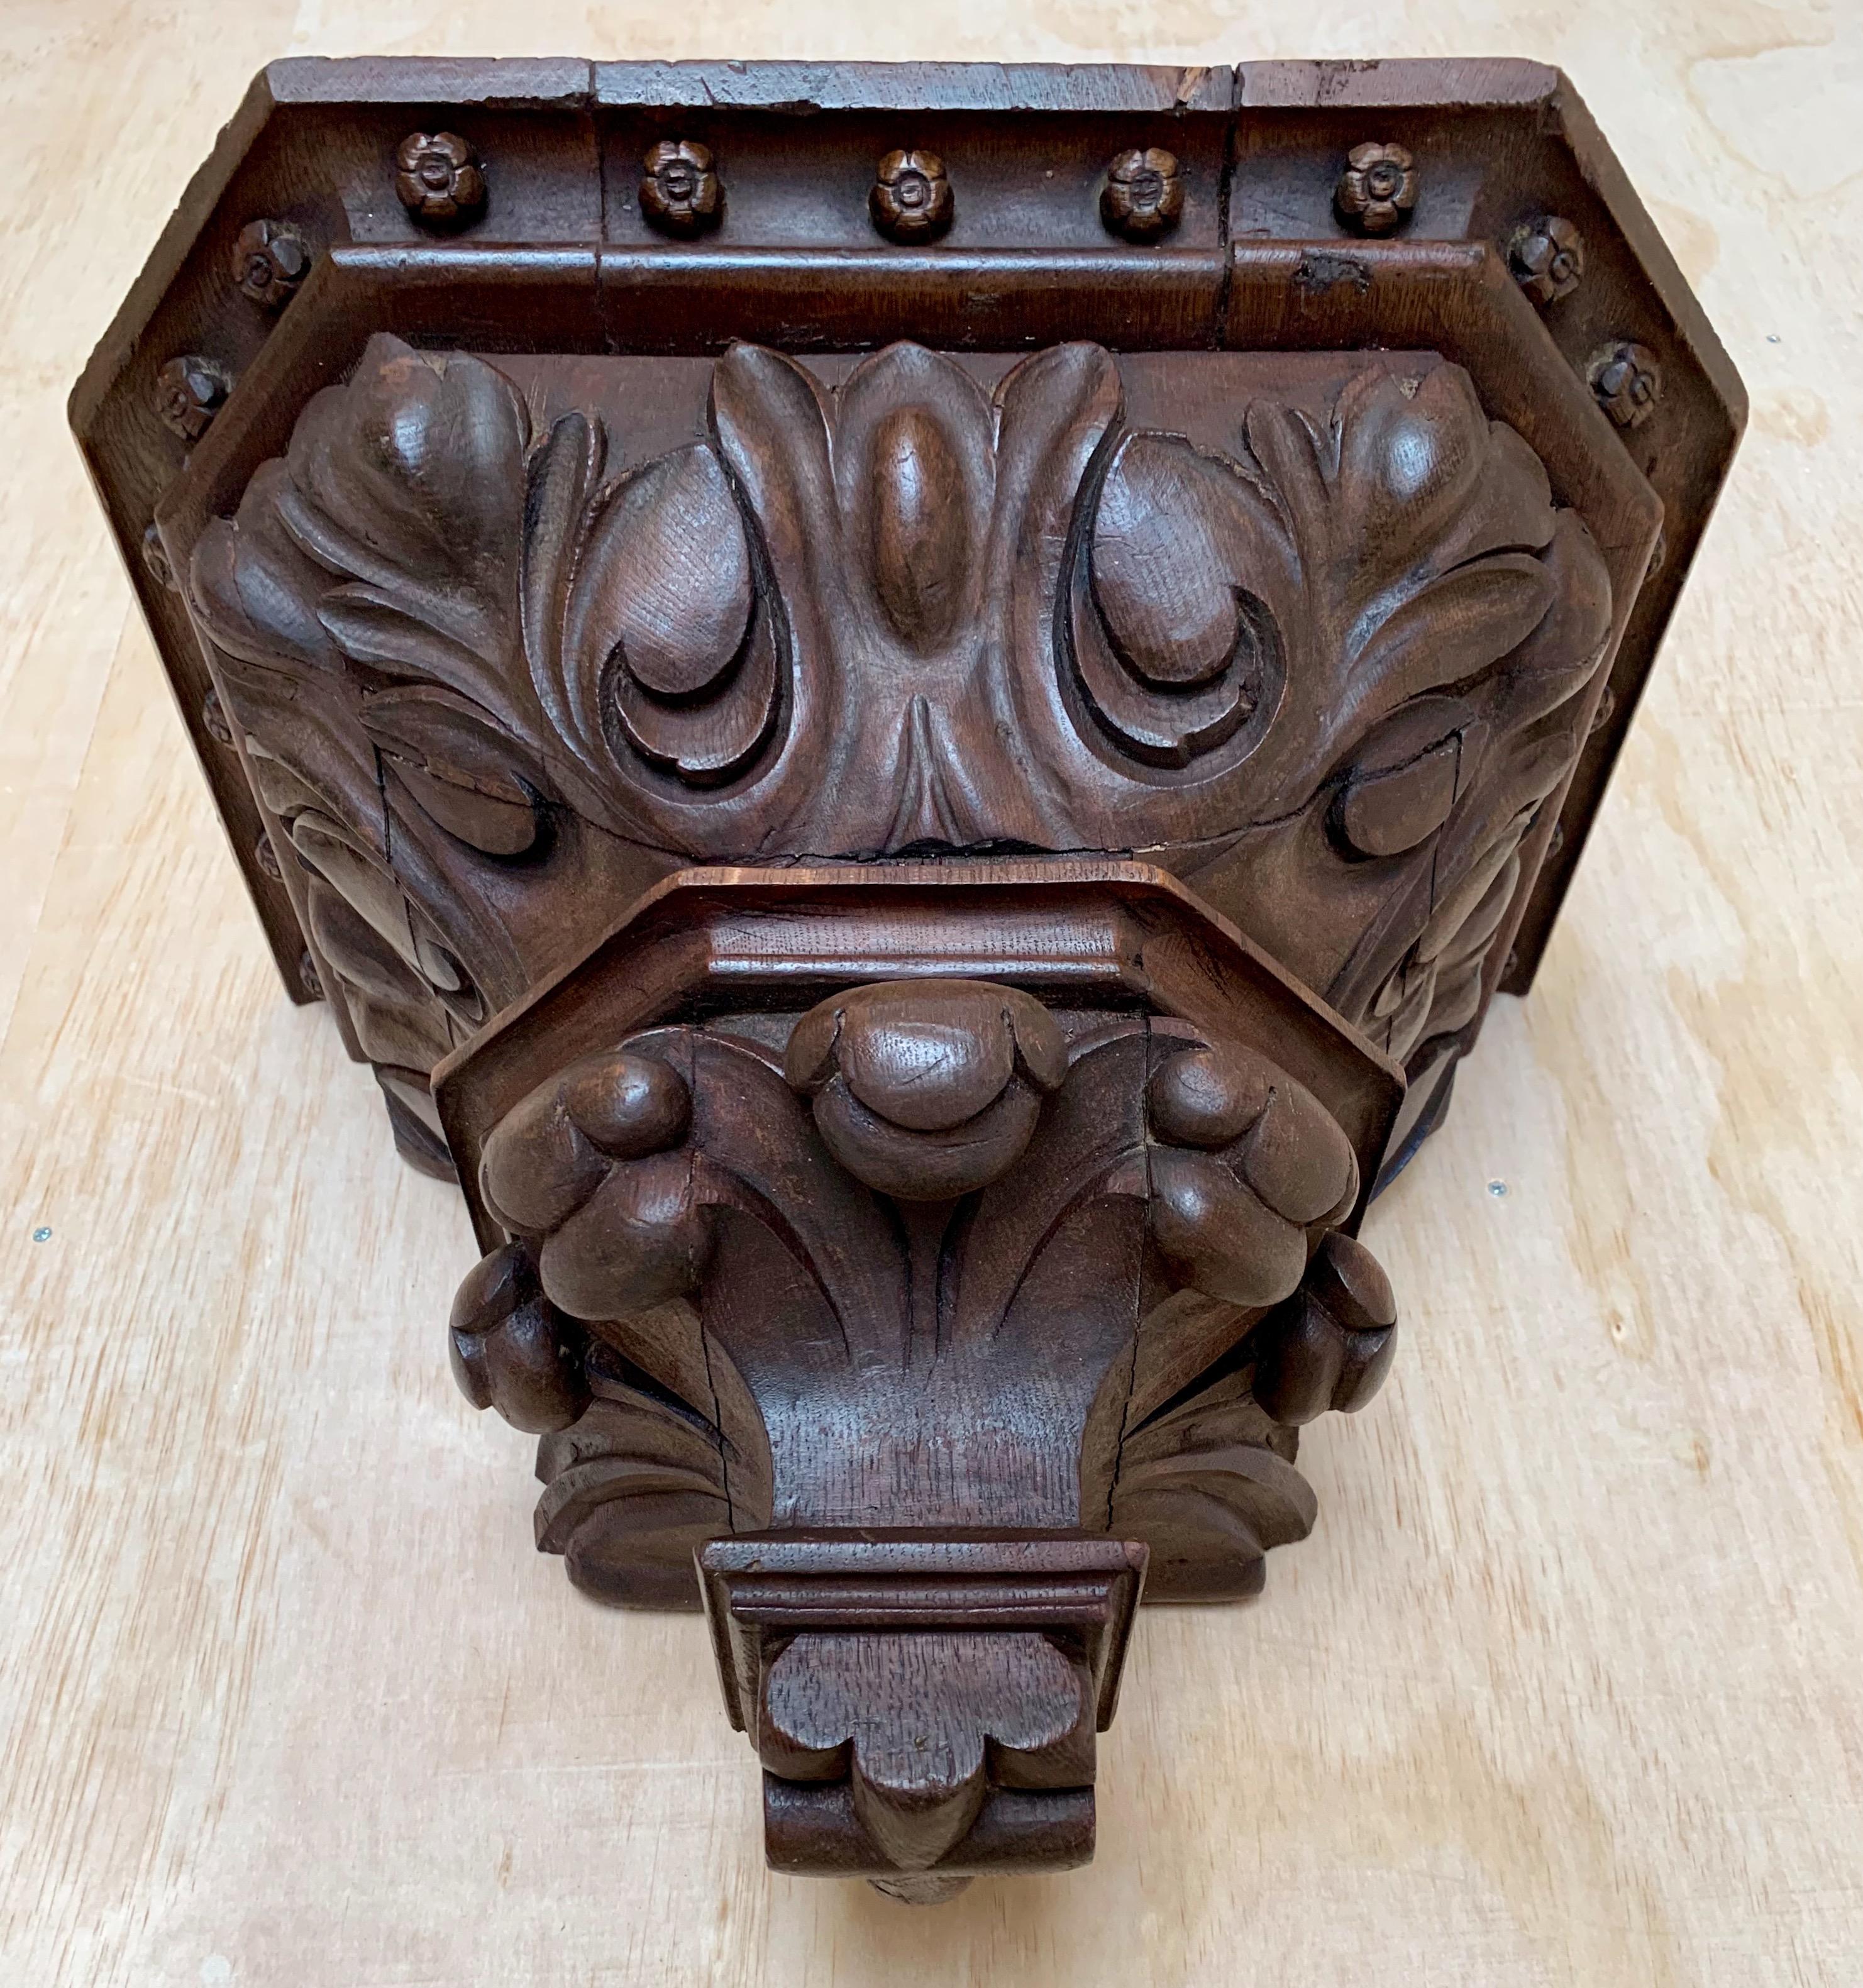 Antique large Gothic Revival wall bracket with carved acanthus leafs

This handcrafted and hand-carved, Gothic Revival wall bracket is one of the largest we ever had the pleasure of offering. Together with the natural flowing and deeply carved,